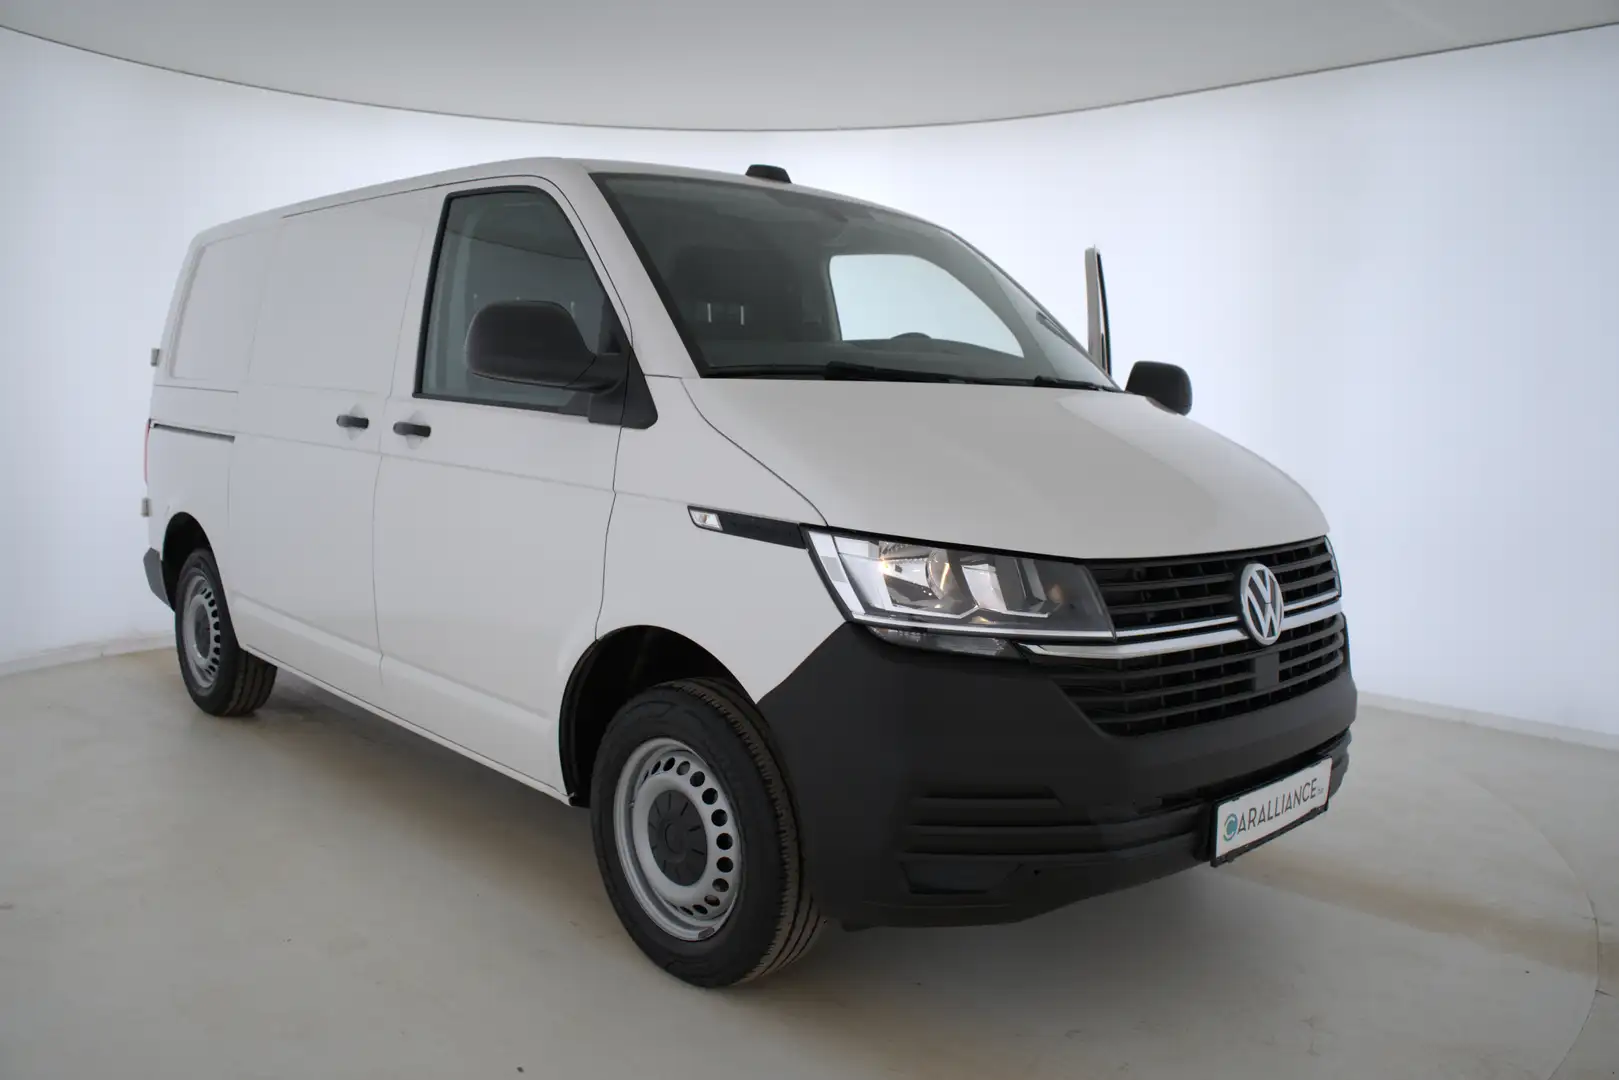 Volkswagen T6 Transporter Fourgon  2.0TDI|APP-CONNECT|3PLACES|AIRCO Blanc - 2